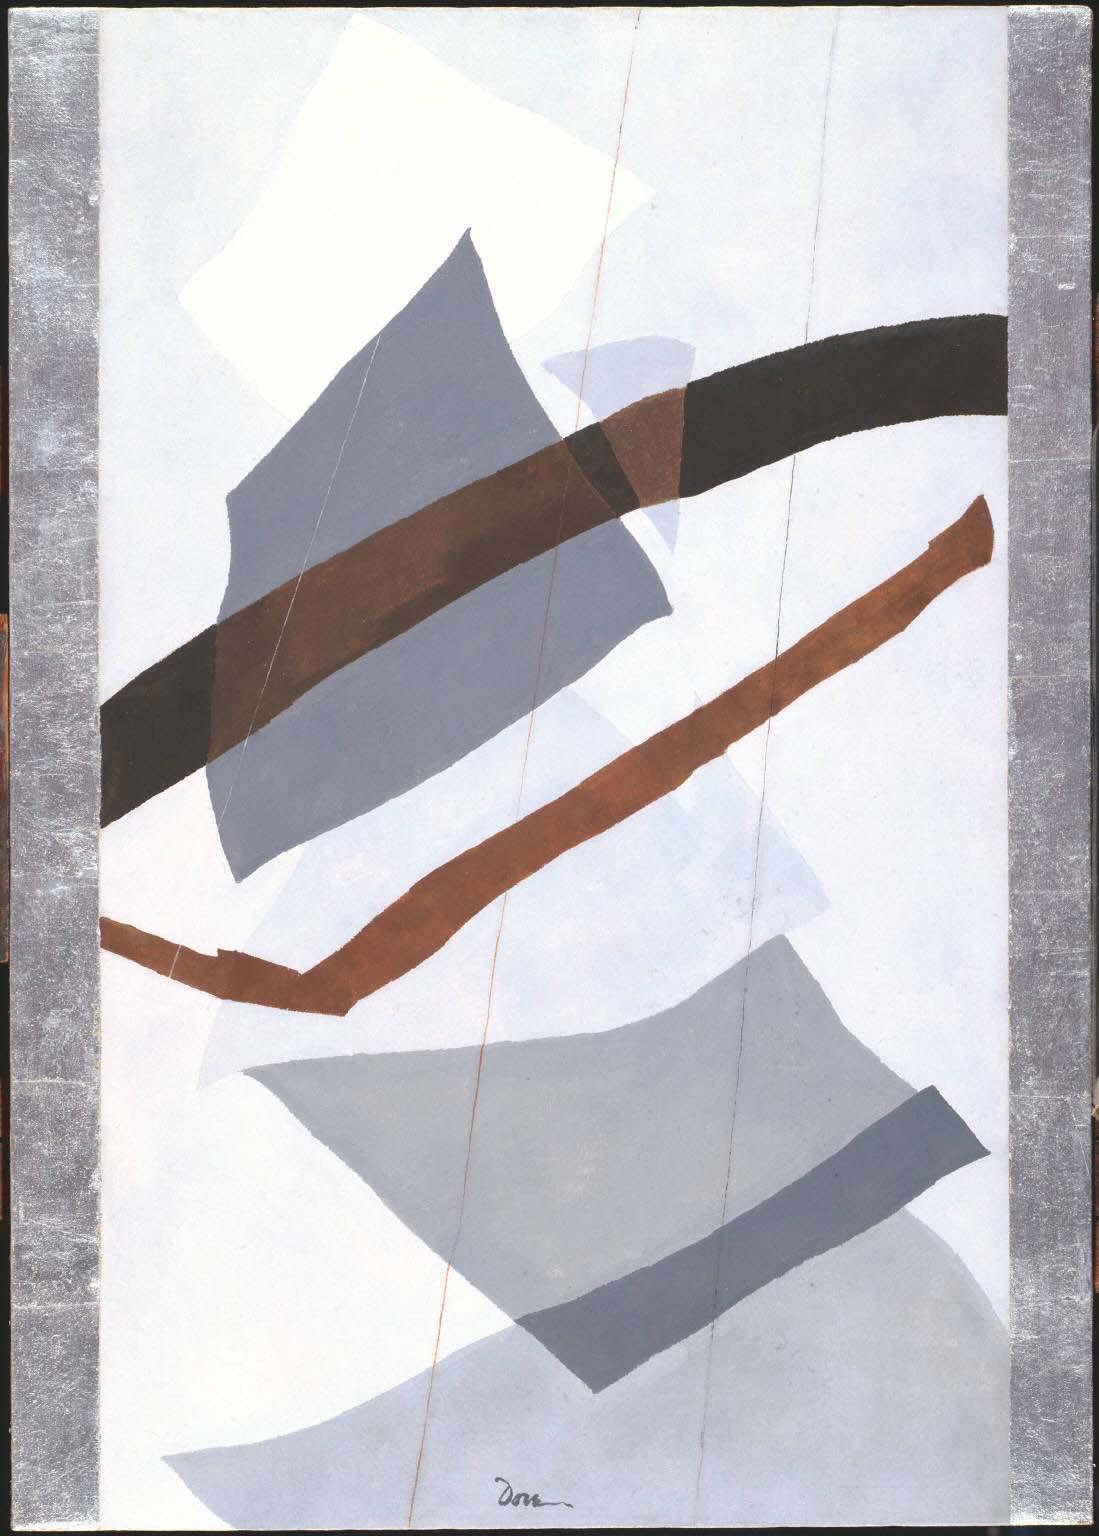 Rain or SnowDove, Arthur G., Rain or Snow, 1943, Oil and wax emulsion with silver leaf on canvas 35 x 25 in.; 88.9 x 63.5 cm.. Acquired 1943. Paintings, 0567, American.